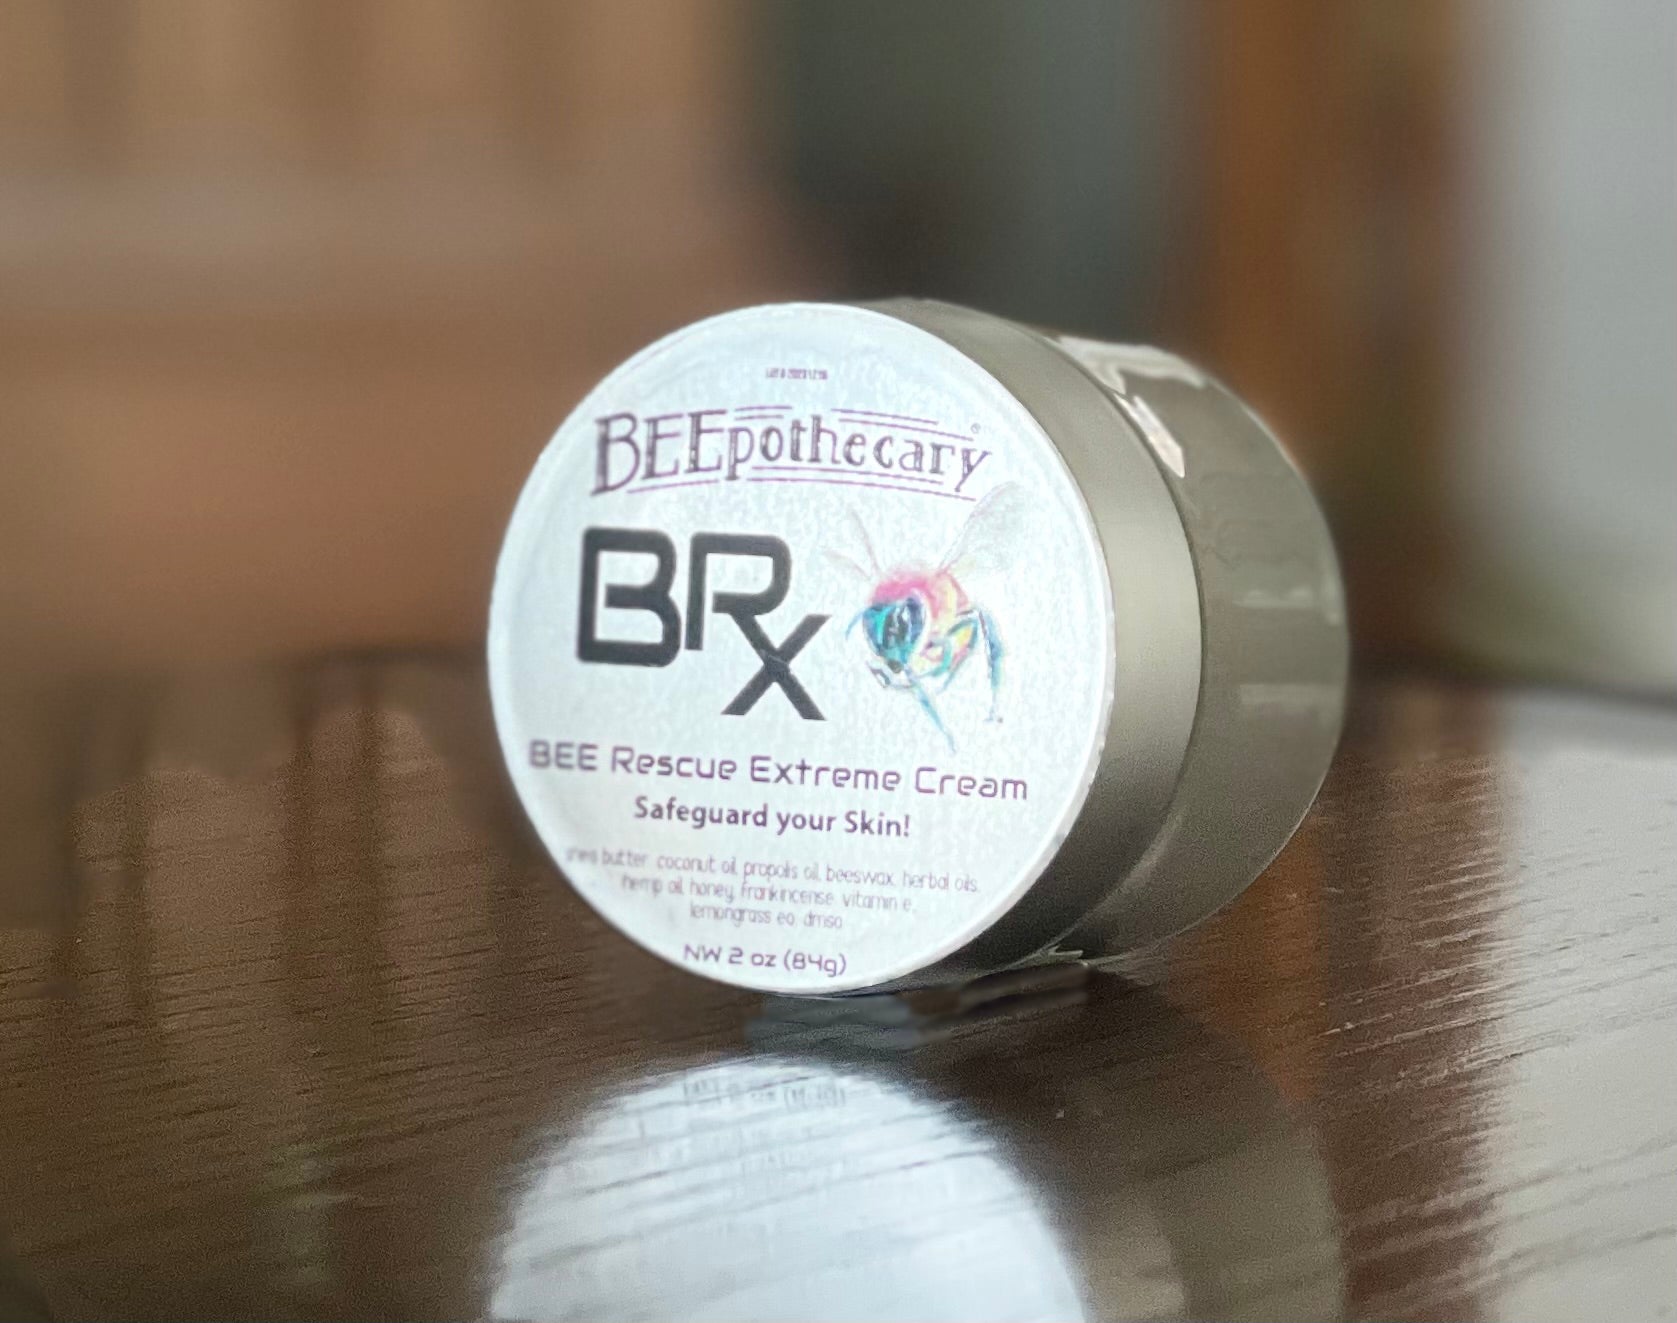 BEEpothecary BEE Rescue Extreme Cream in silver 2 oz container